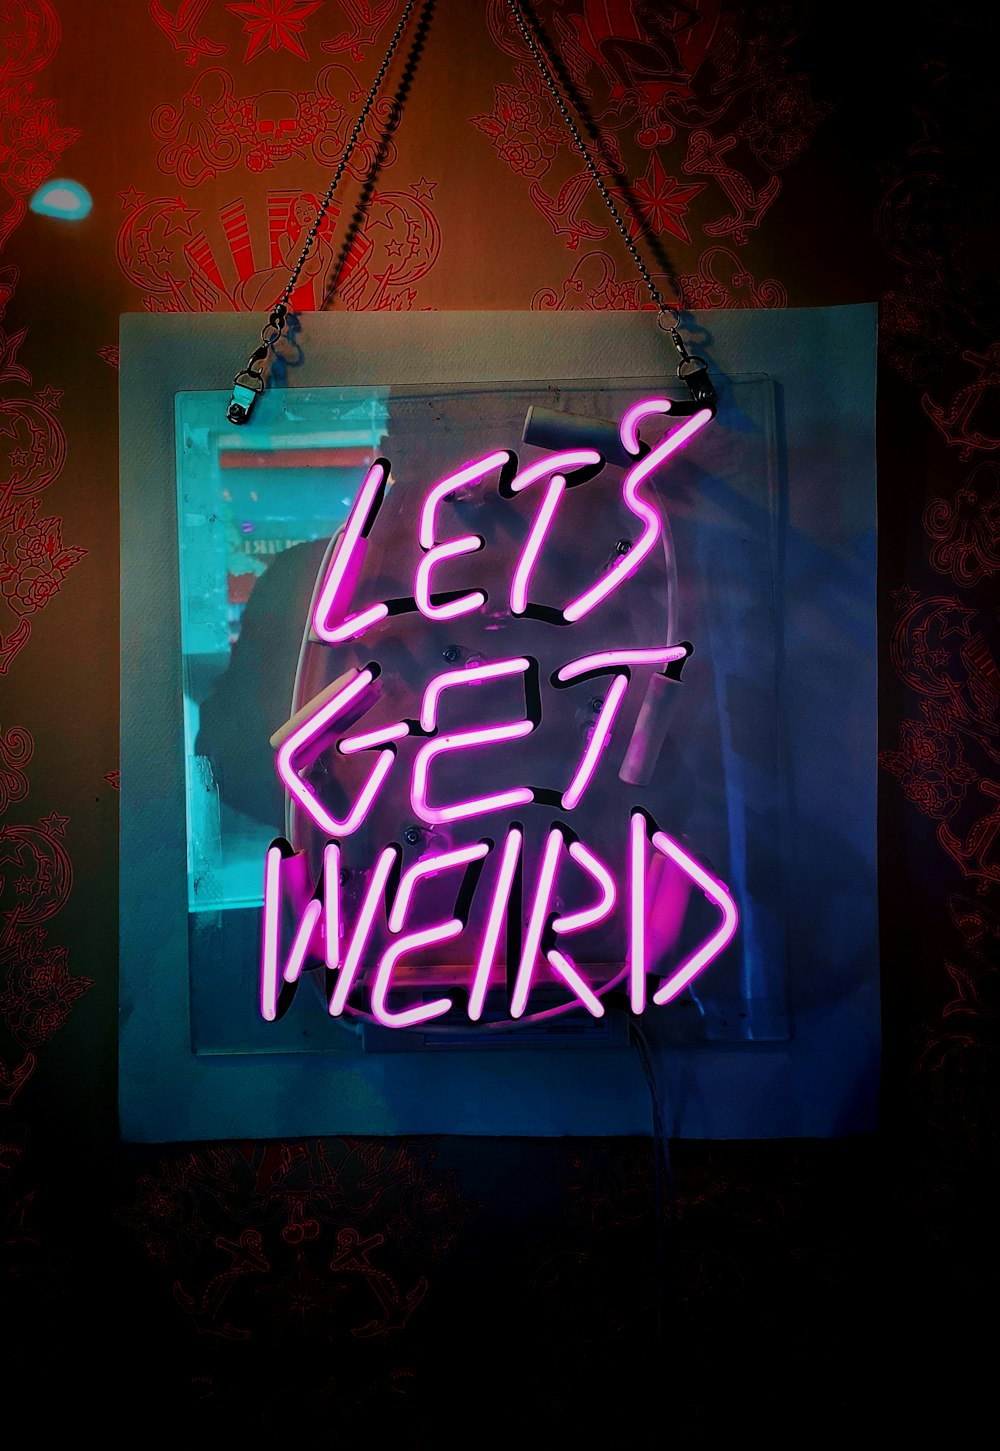 Let's Get Weird Neon Light Signageの浅いフォーカス写真